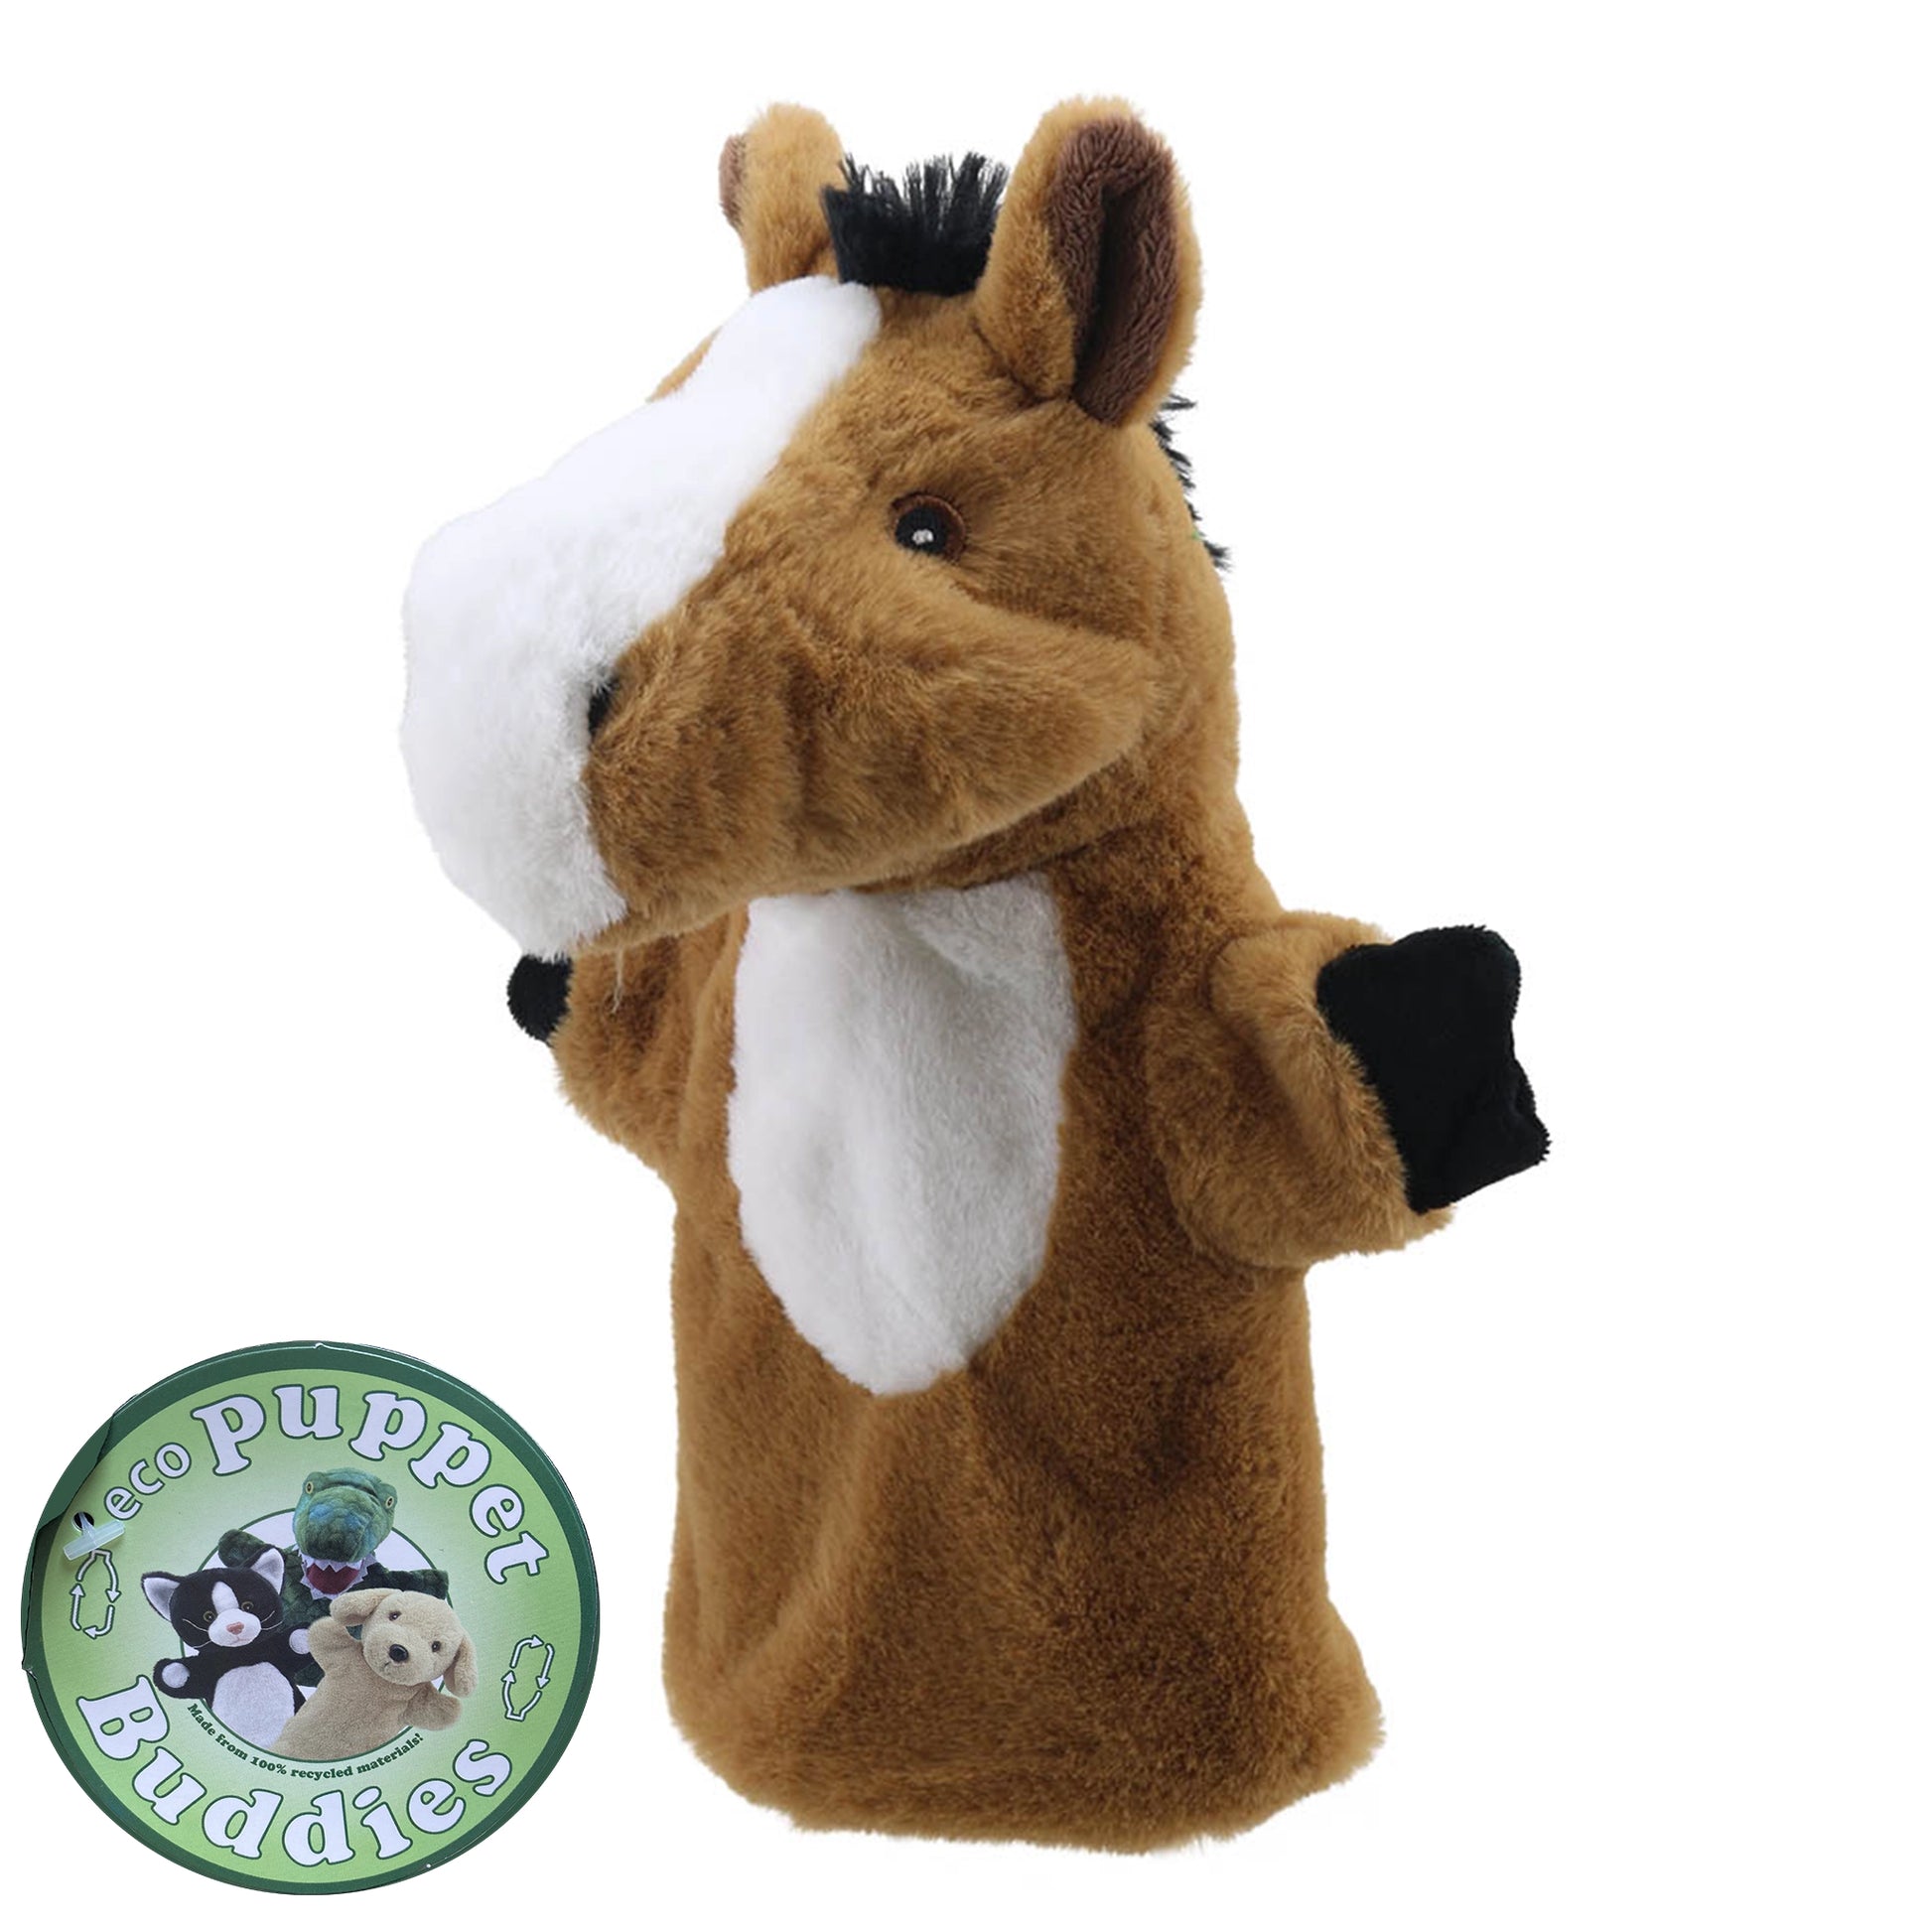 Horse Puppet Eco Buddies Hand Puppet - The Puppet Company - The Forgotten Toy Shop